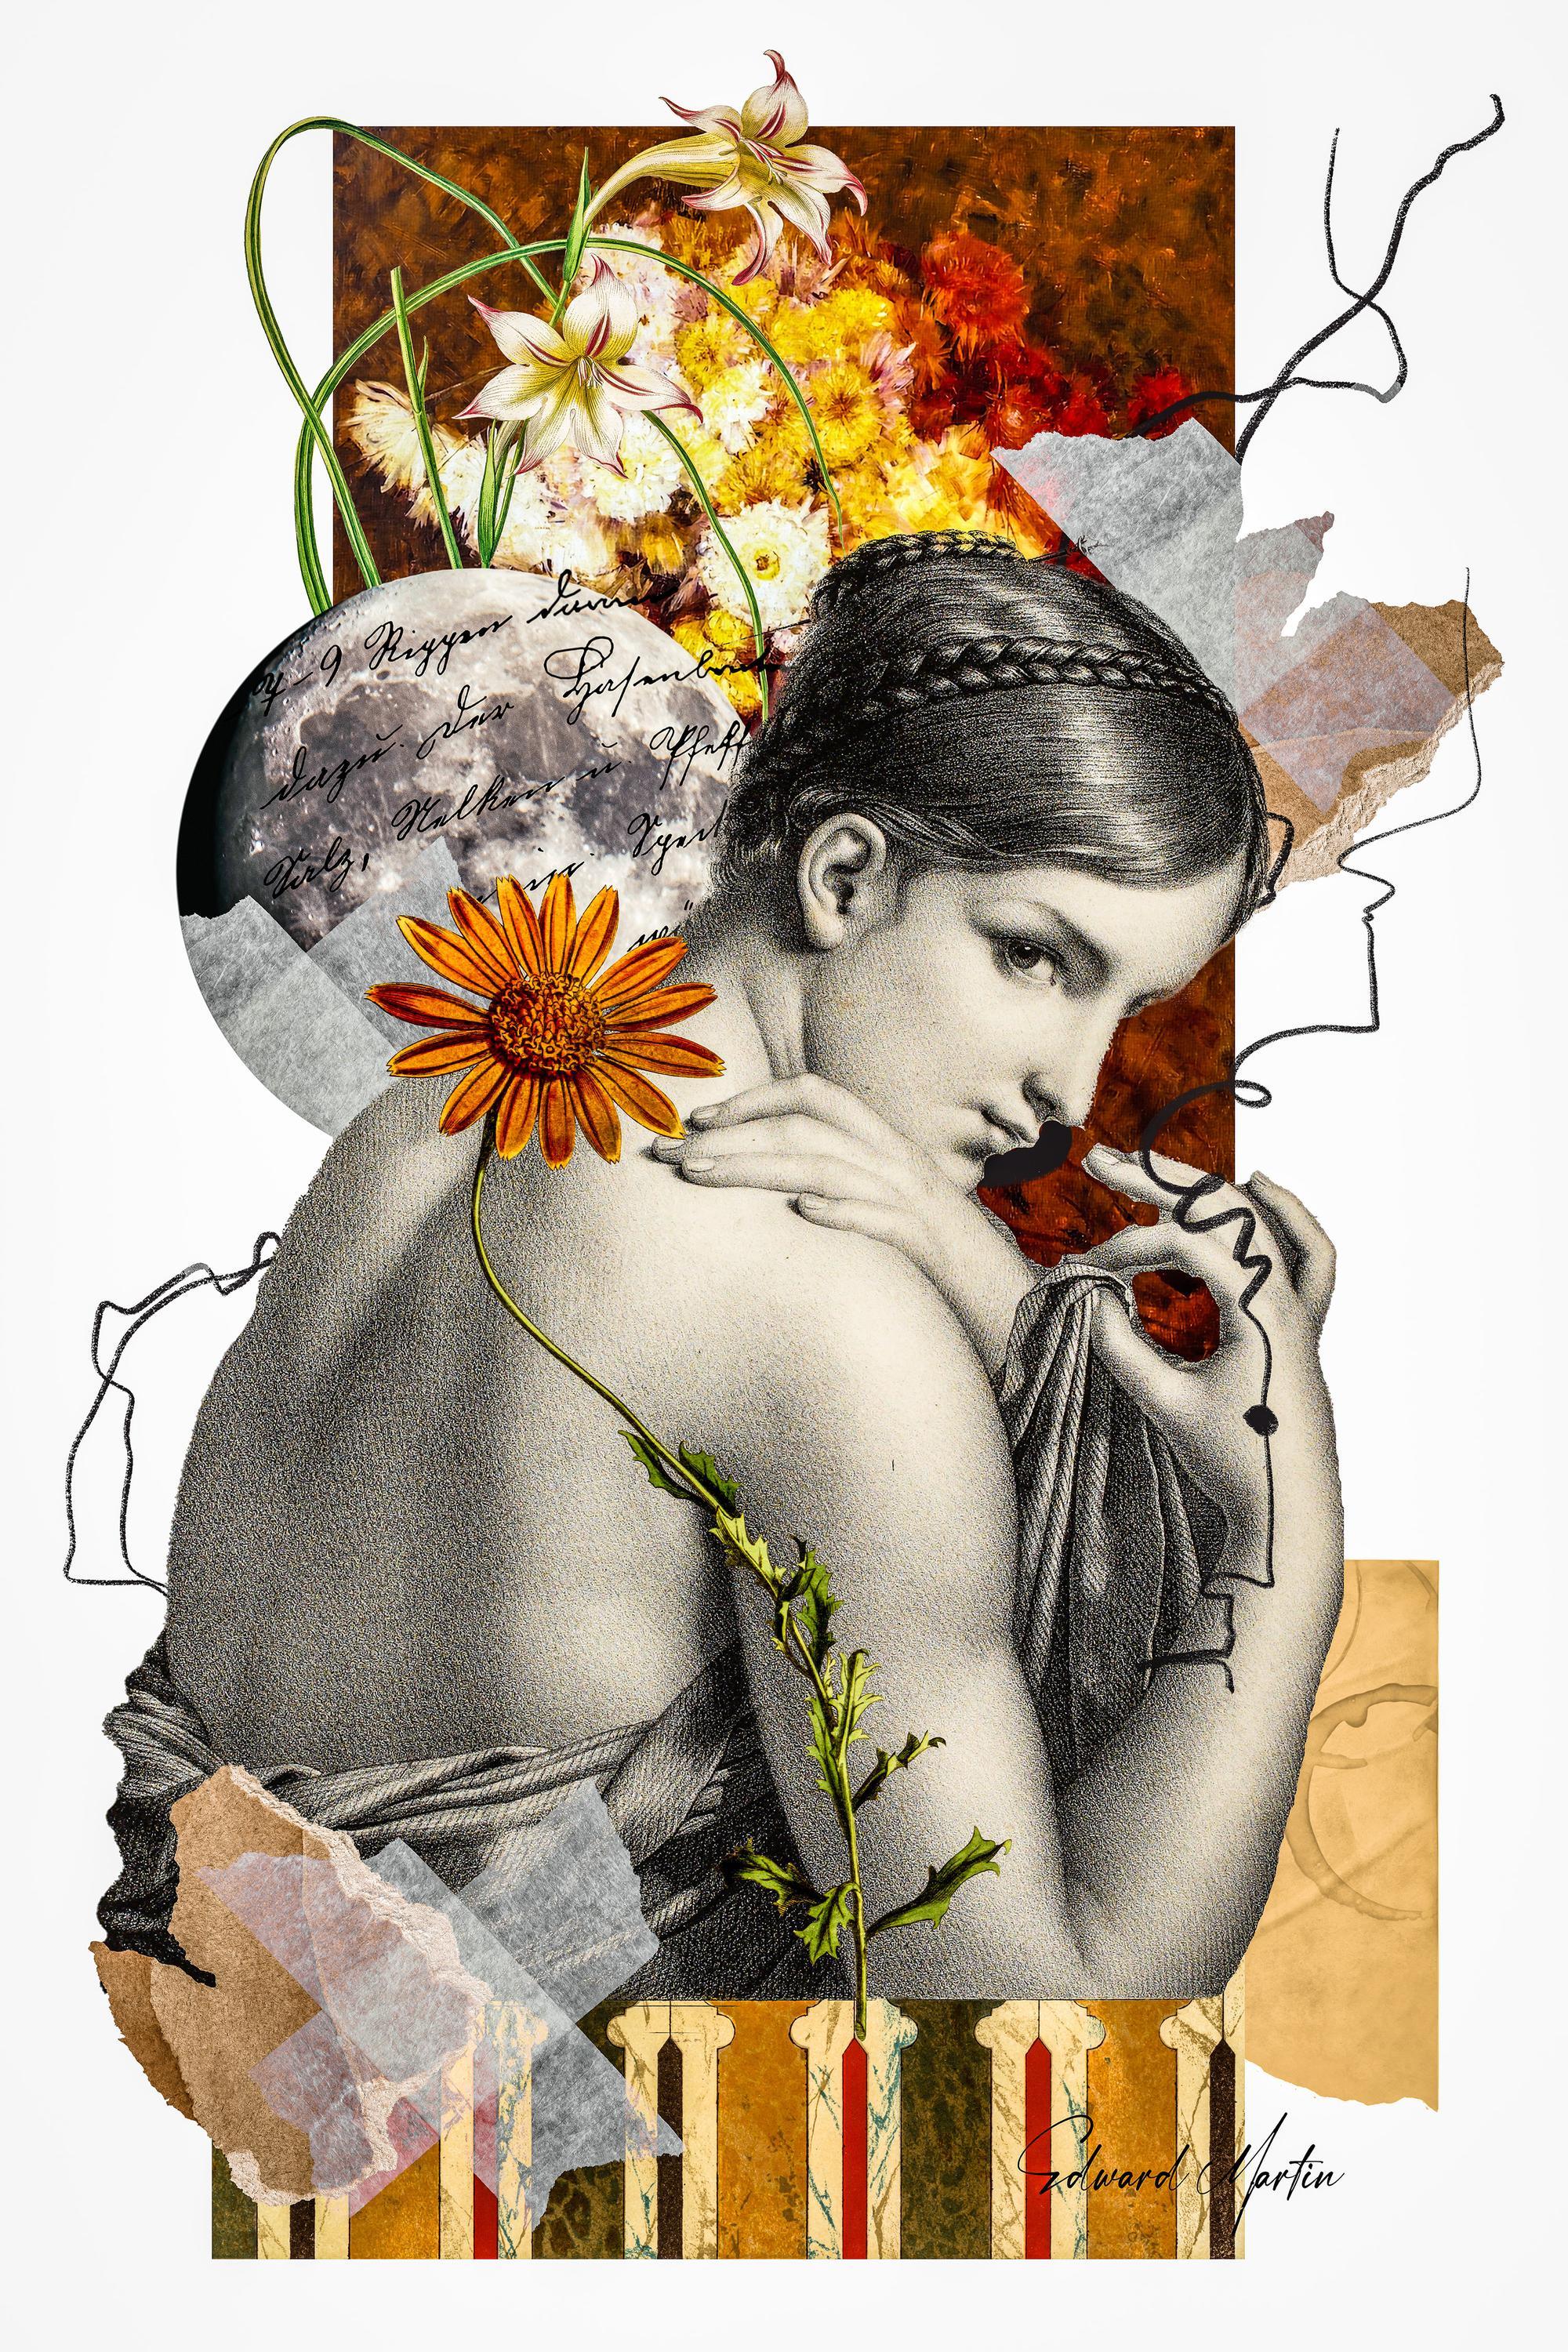 Lunar Thoughts Collage by Edward Martin - Elementologie